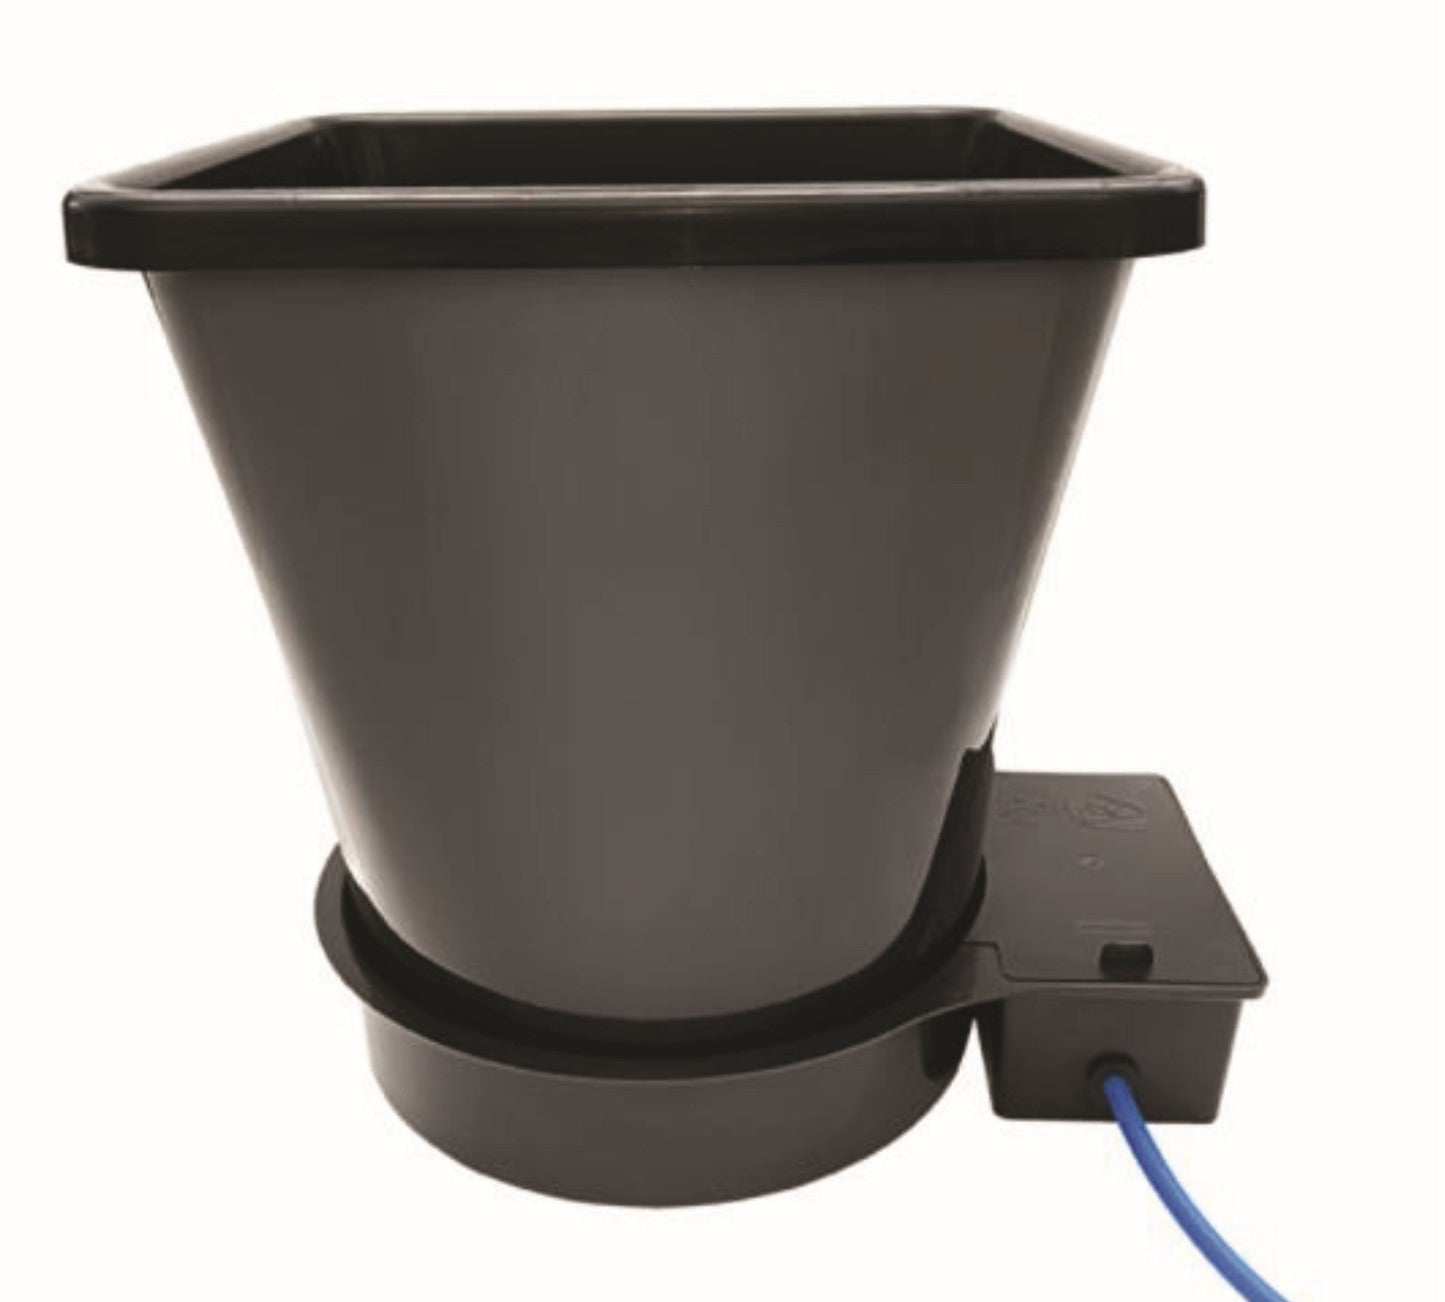 The "TAS AutoPot Bucket 1XL Module, 6.6 Gallon" is a black pot specifically designed for root and vining crops. It features a convenient blue hose attached to it, allowing for easy irrigation.